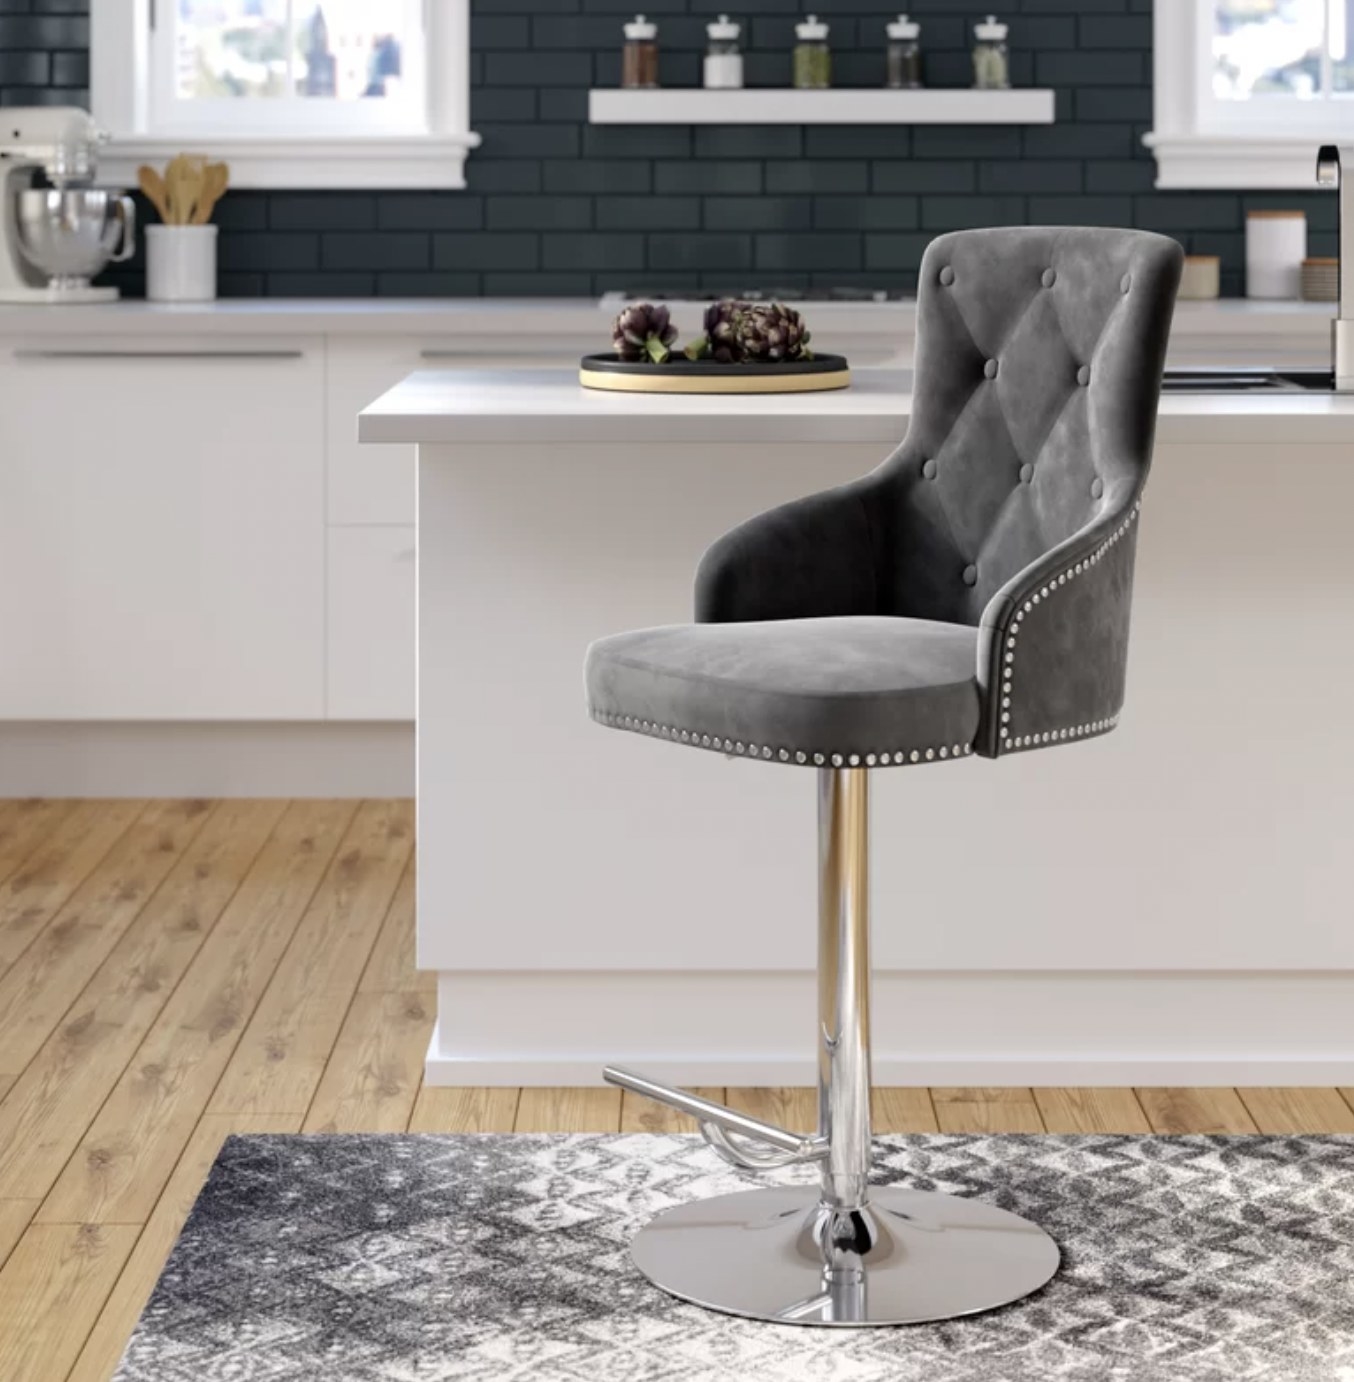 The grey swivel stool at counter